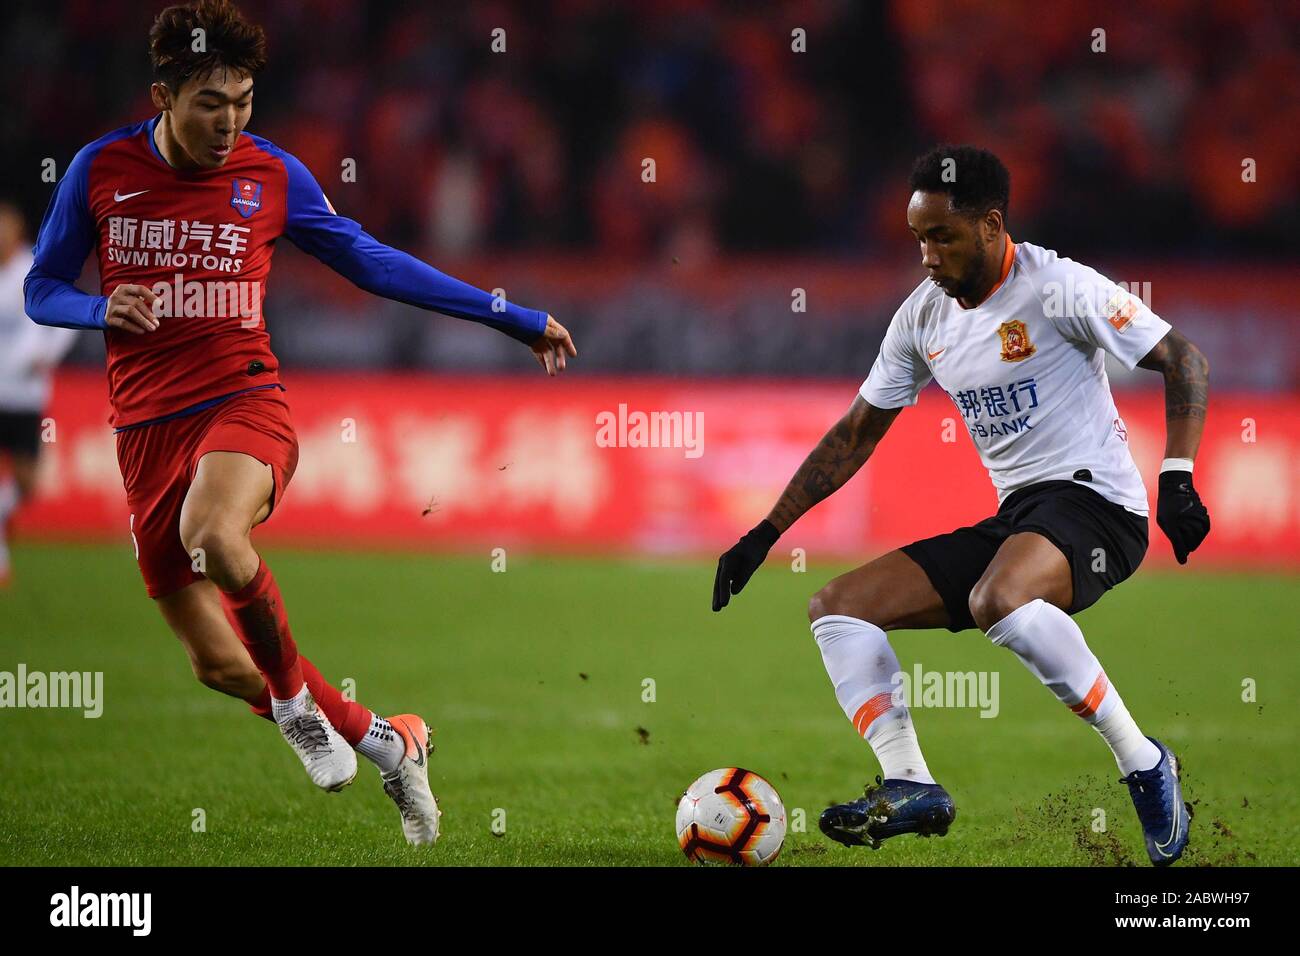 Brazilian football player Rafael Pereira da Silva, commonly known as Rafael or Rafael da Silva, of Wuhan Zall F.C., right, keeps the ball during the 29th round match of Chinese Football Association Super League (CSL) against Chongqing SWM in Chongqing, China, 27 November 2019. Chongqing SWM was defeated by Wuhan Zall with 0-1. Stock Photo